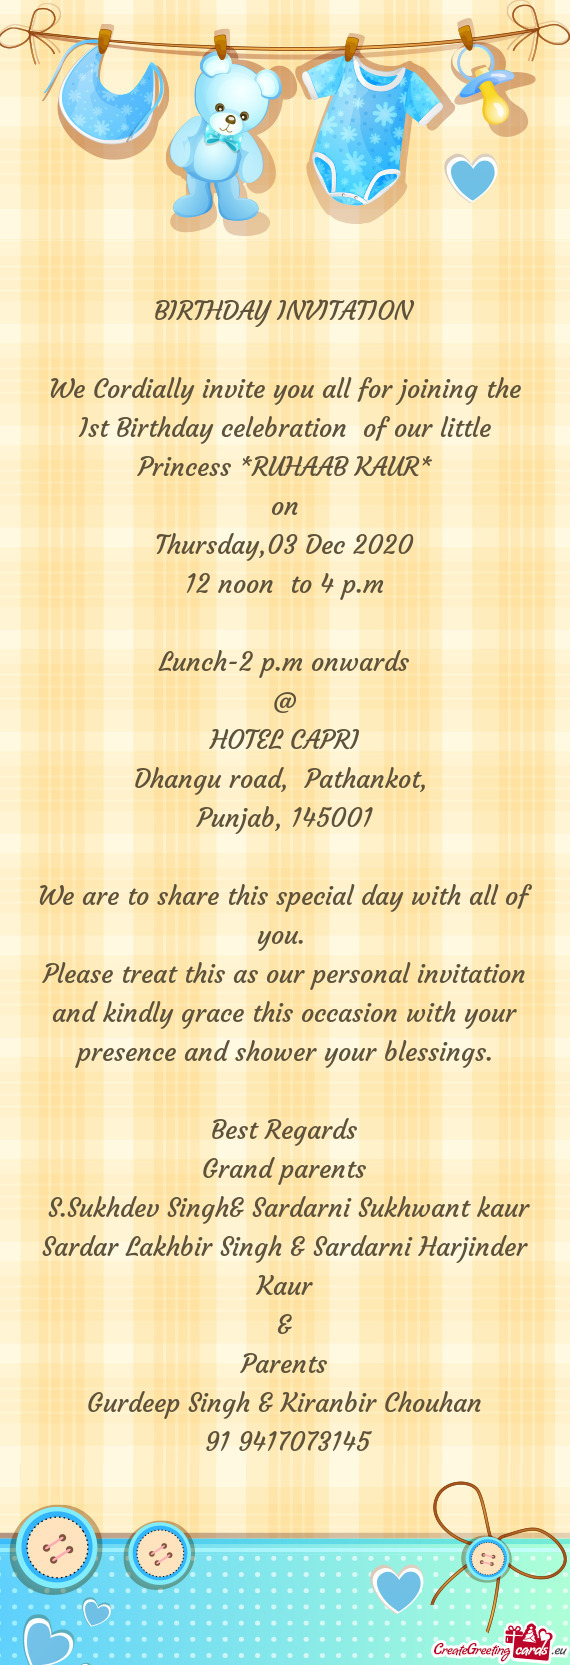 We Cordially invite you all for joining the Ist Birthday celebration of our little Princess *RUHAAB